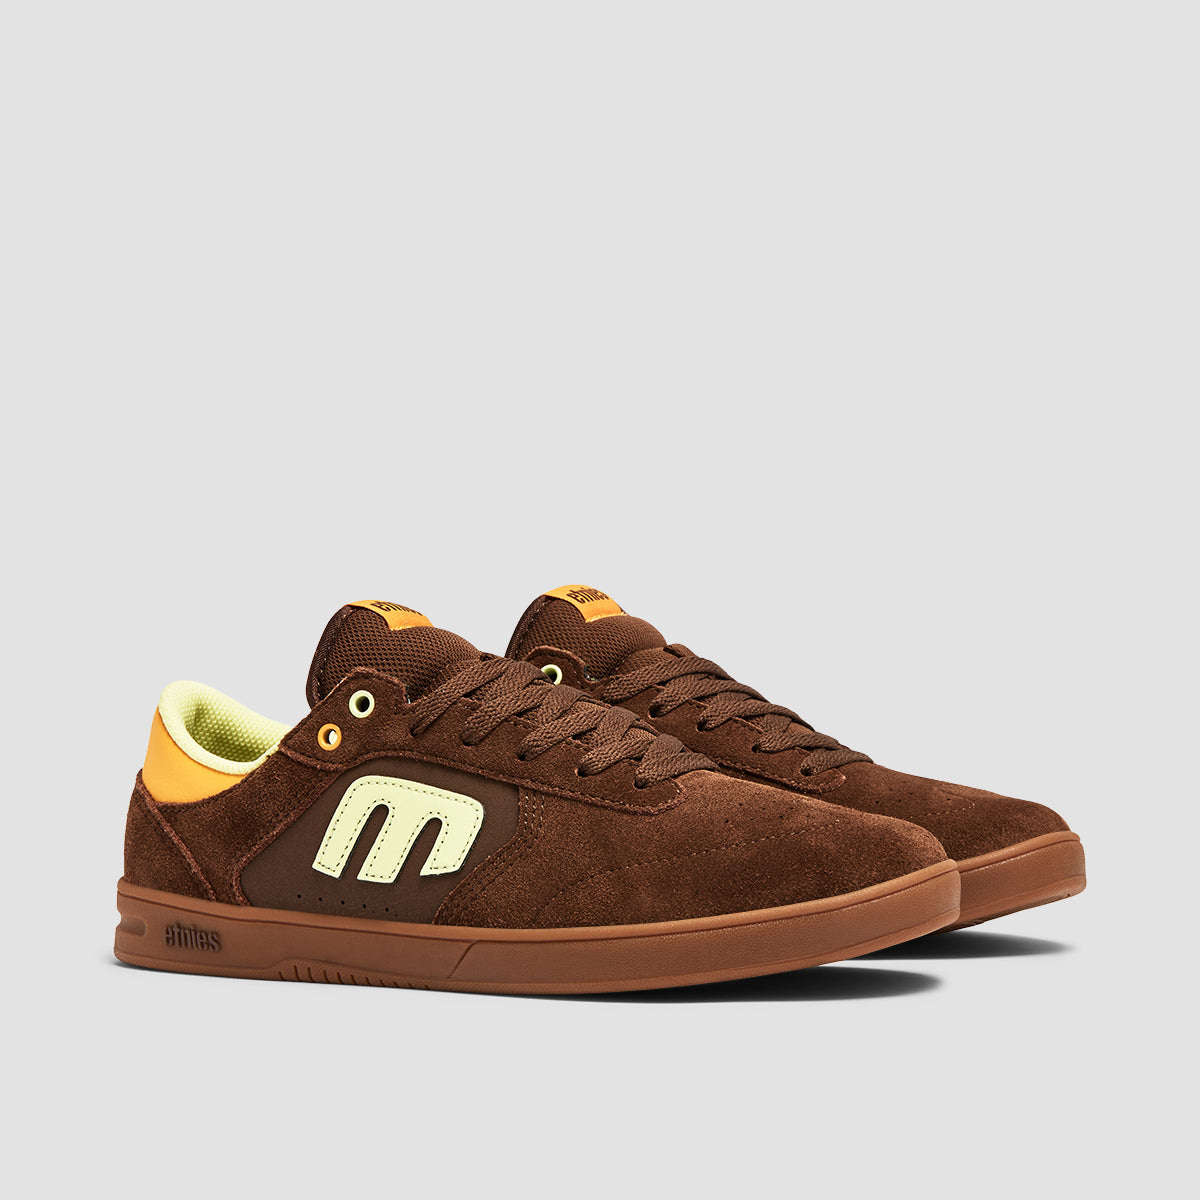 Etnies Windrow Shoes - Brown/Gum